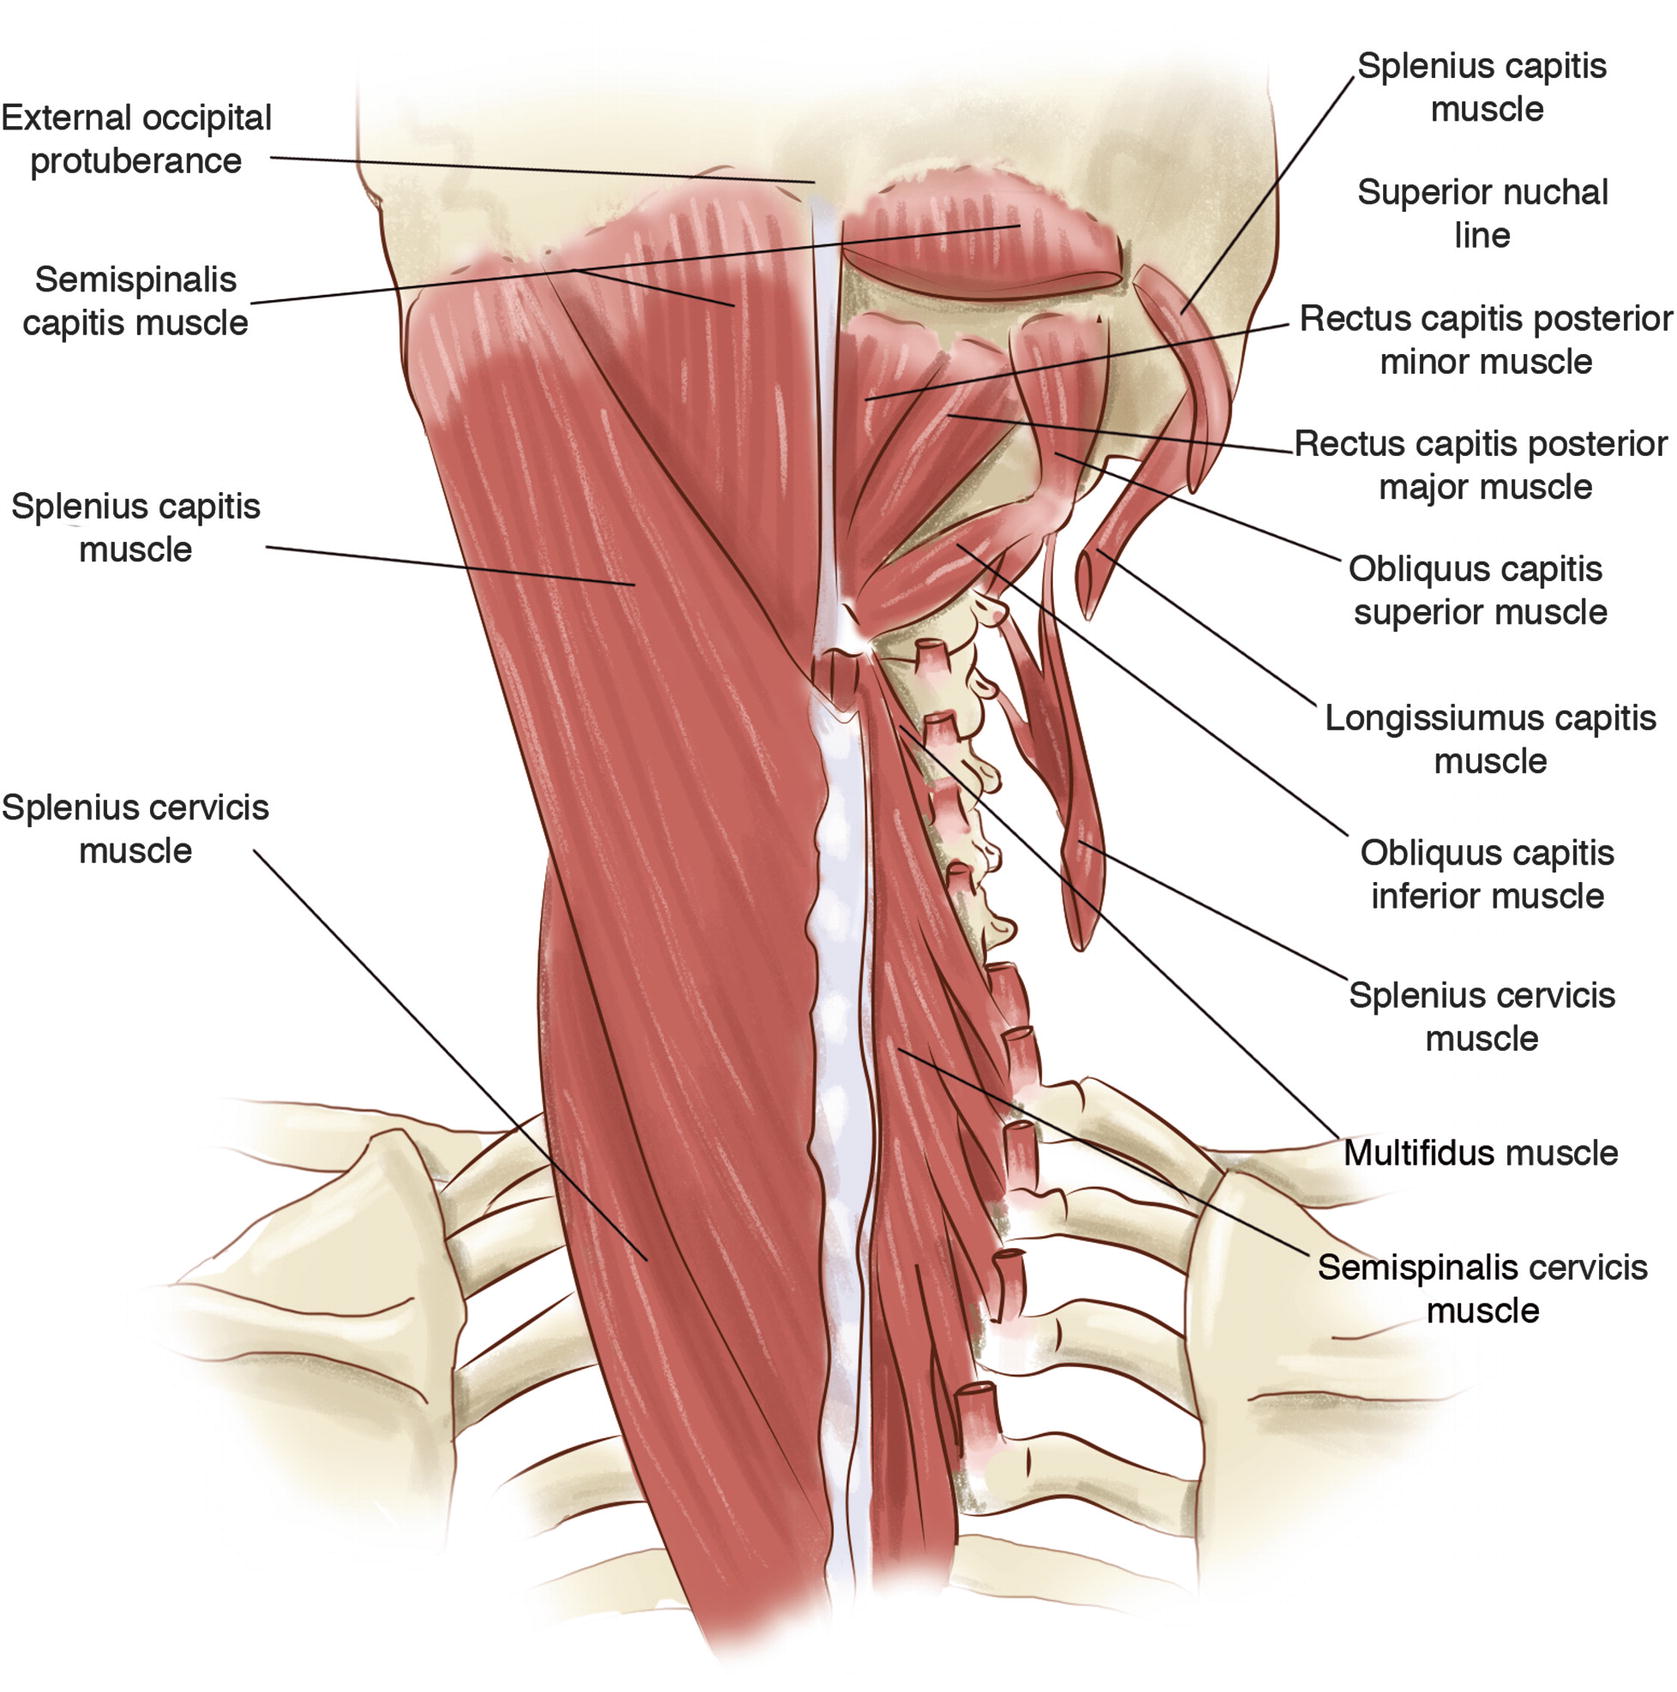 Relevant Surgical Anatomy Of The Posterior Subaxial Spine And The